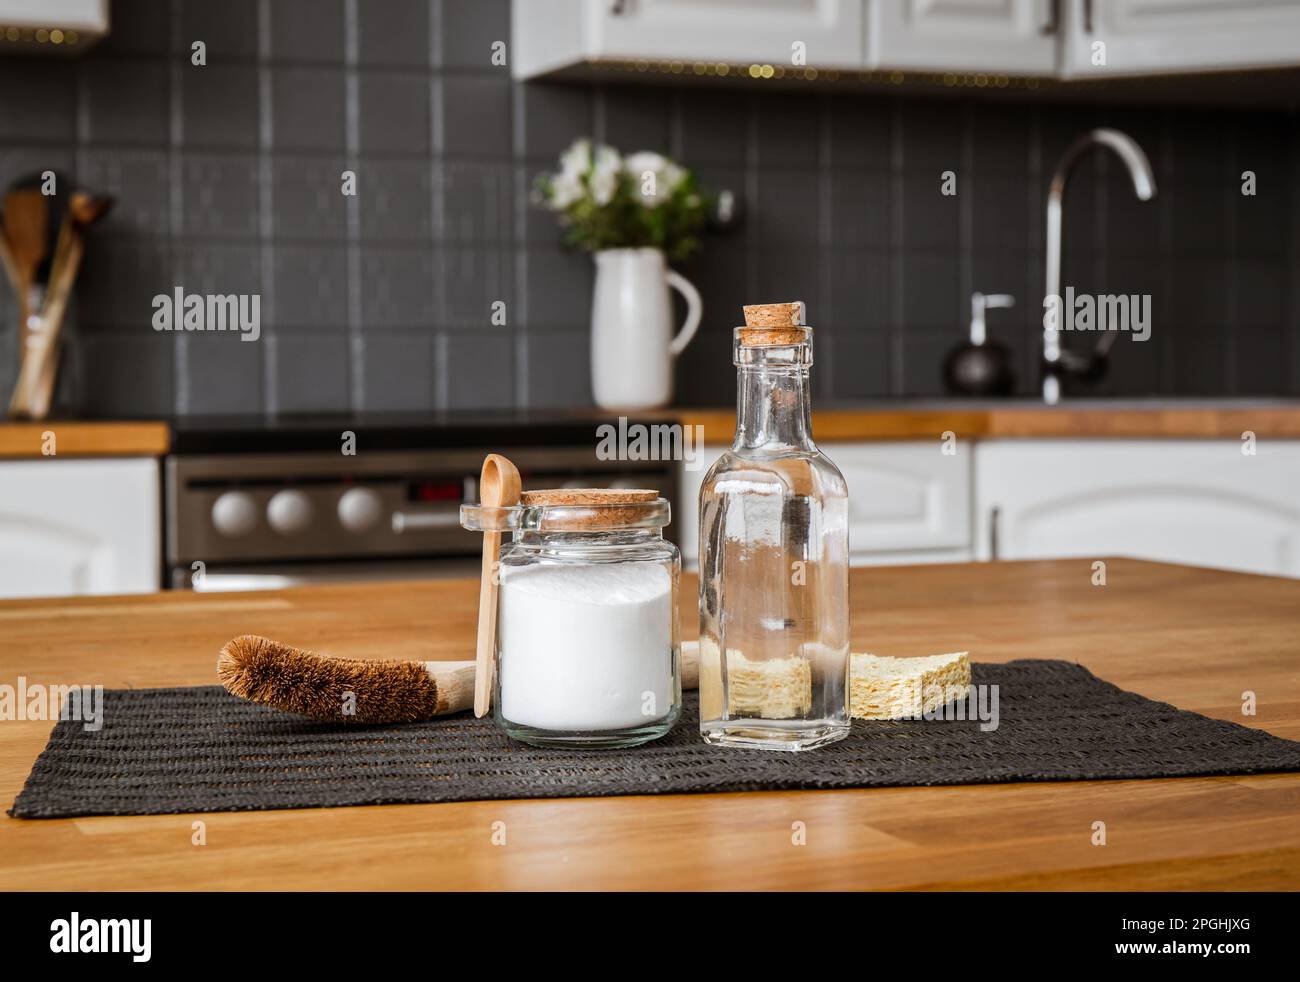 Using baking soda Sodium bicarbonate and white vinegar for home kitchen cleaning concept. White vinegar in glass bottle and baking soda in glass jar. Stock Photo